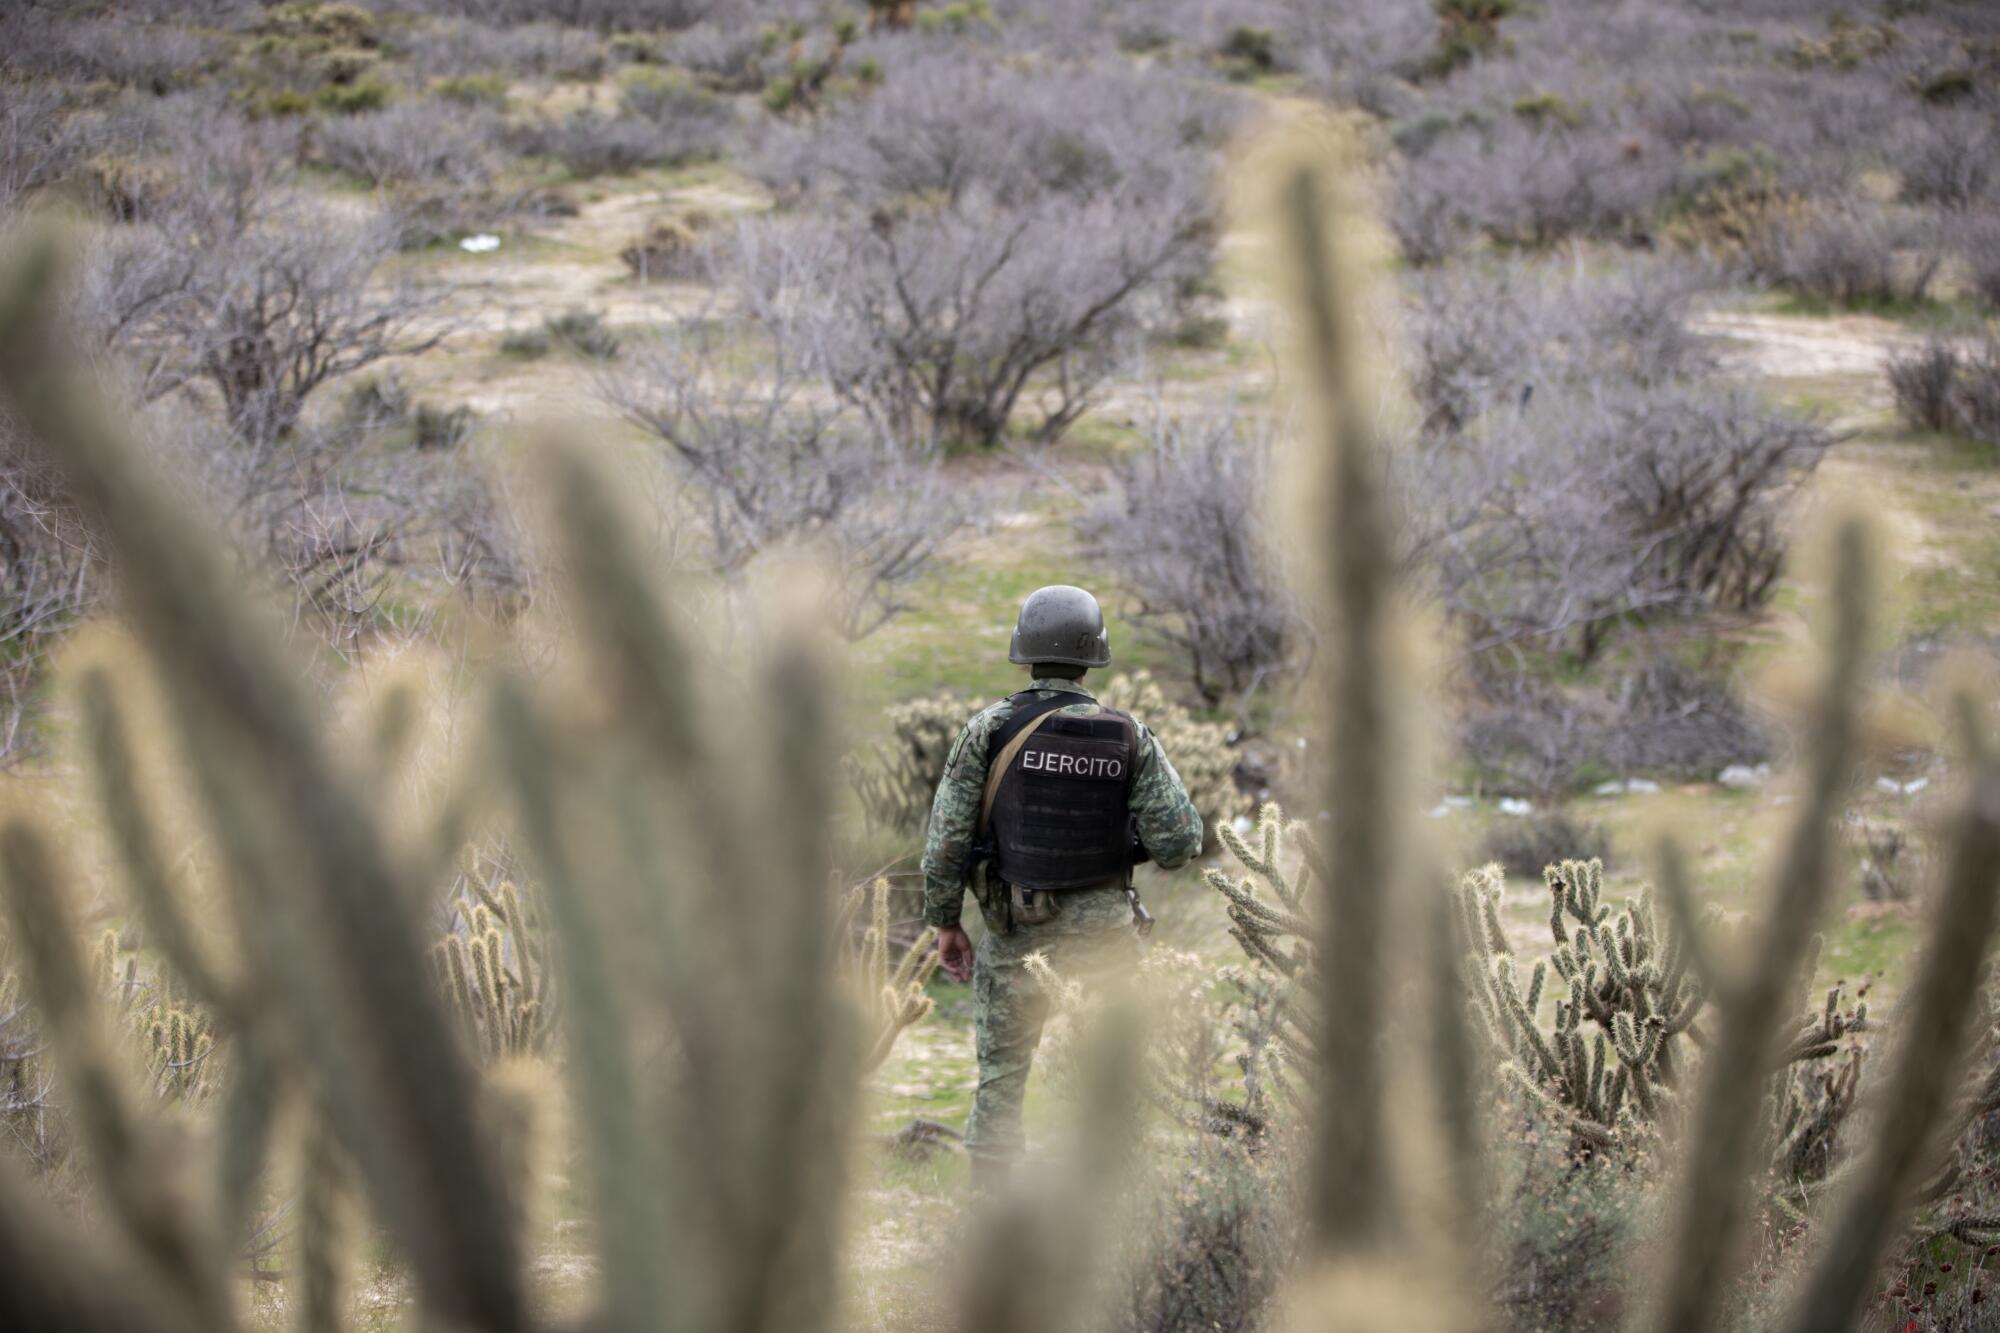 A member of the Mexican army monitors a camp's inspection points